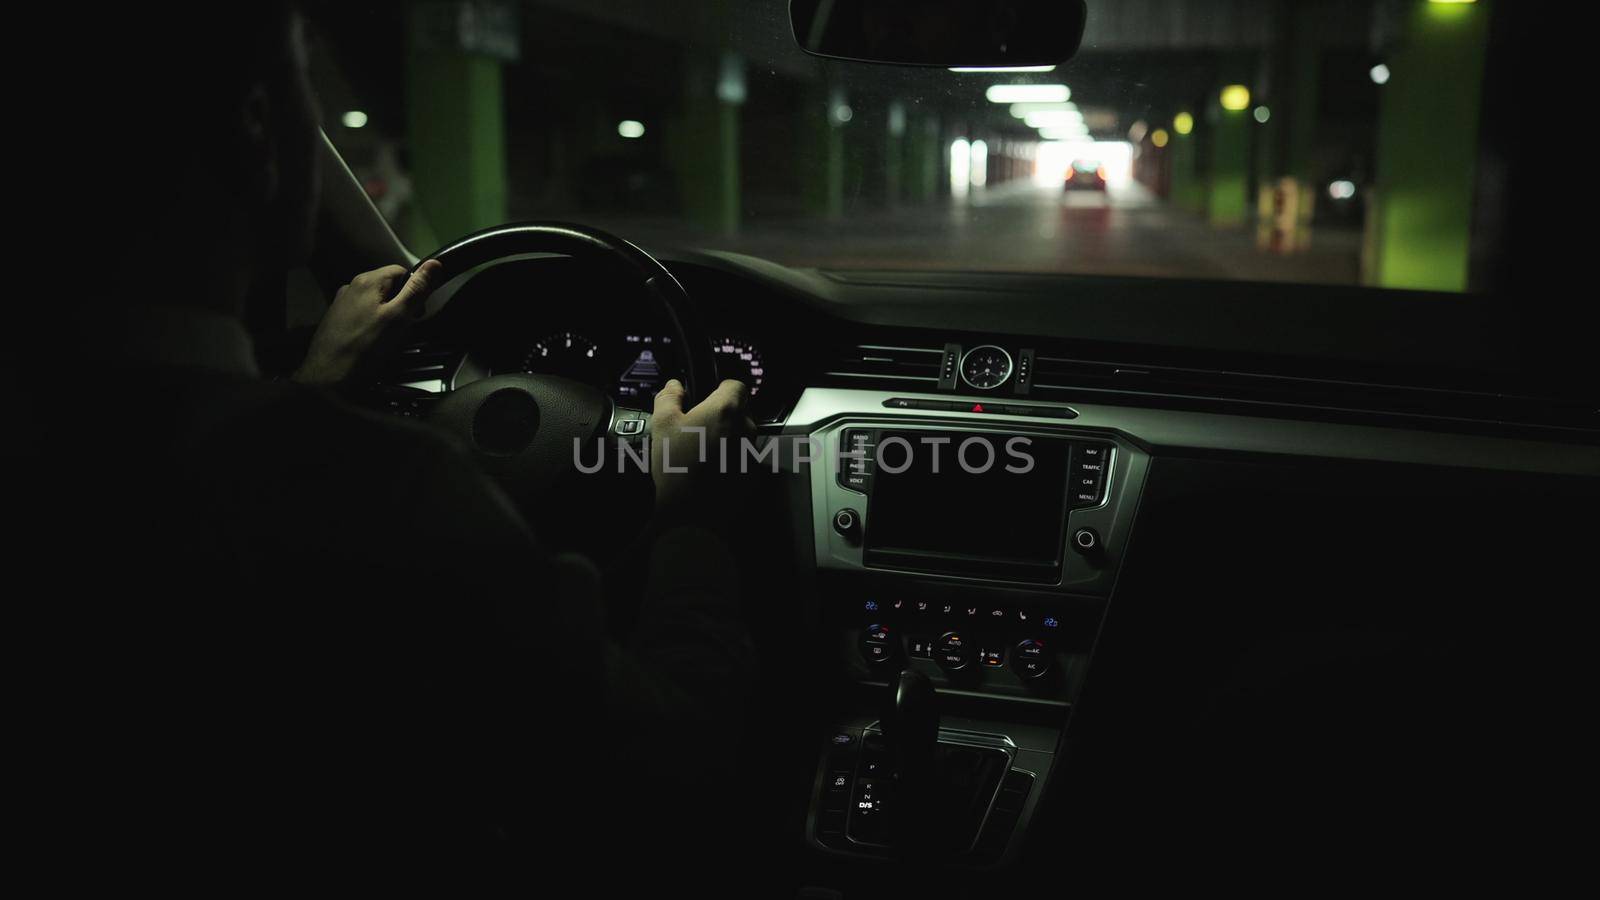 Man driving car on parking space, hands turning steering wheel. Adult man rides in modern car by underground parking. Man driving car through an underground parking lot looking for a place to park by uflypro